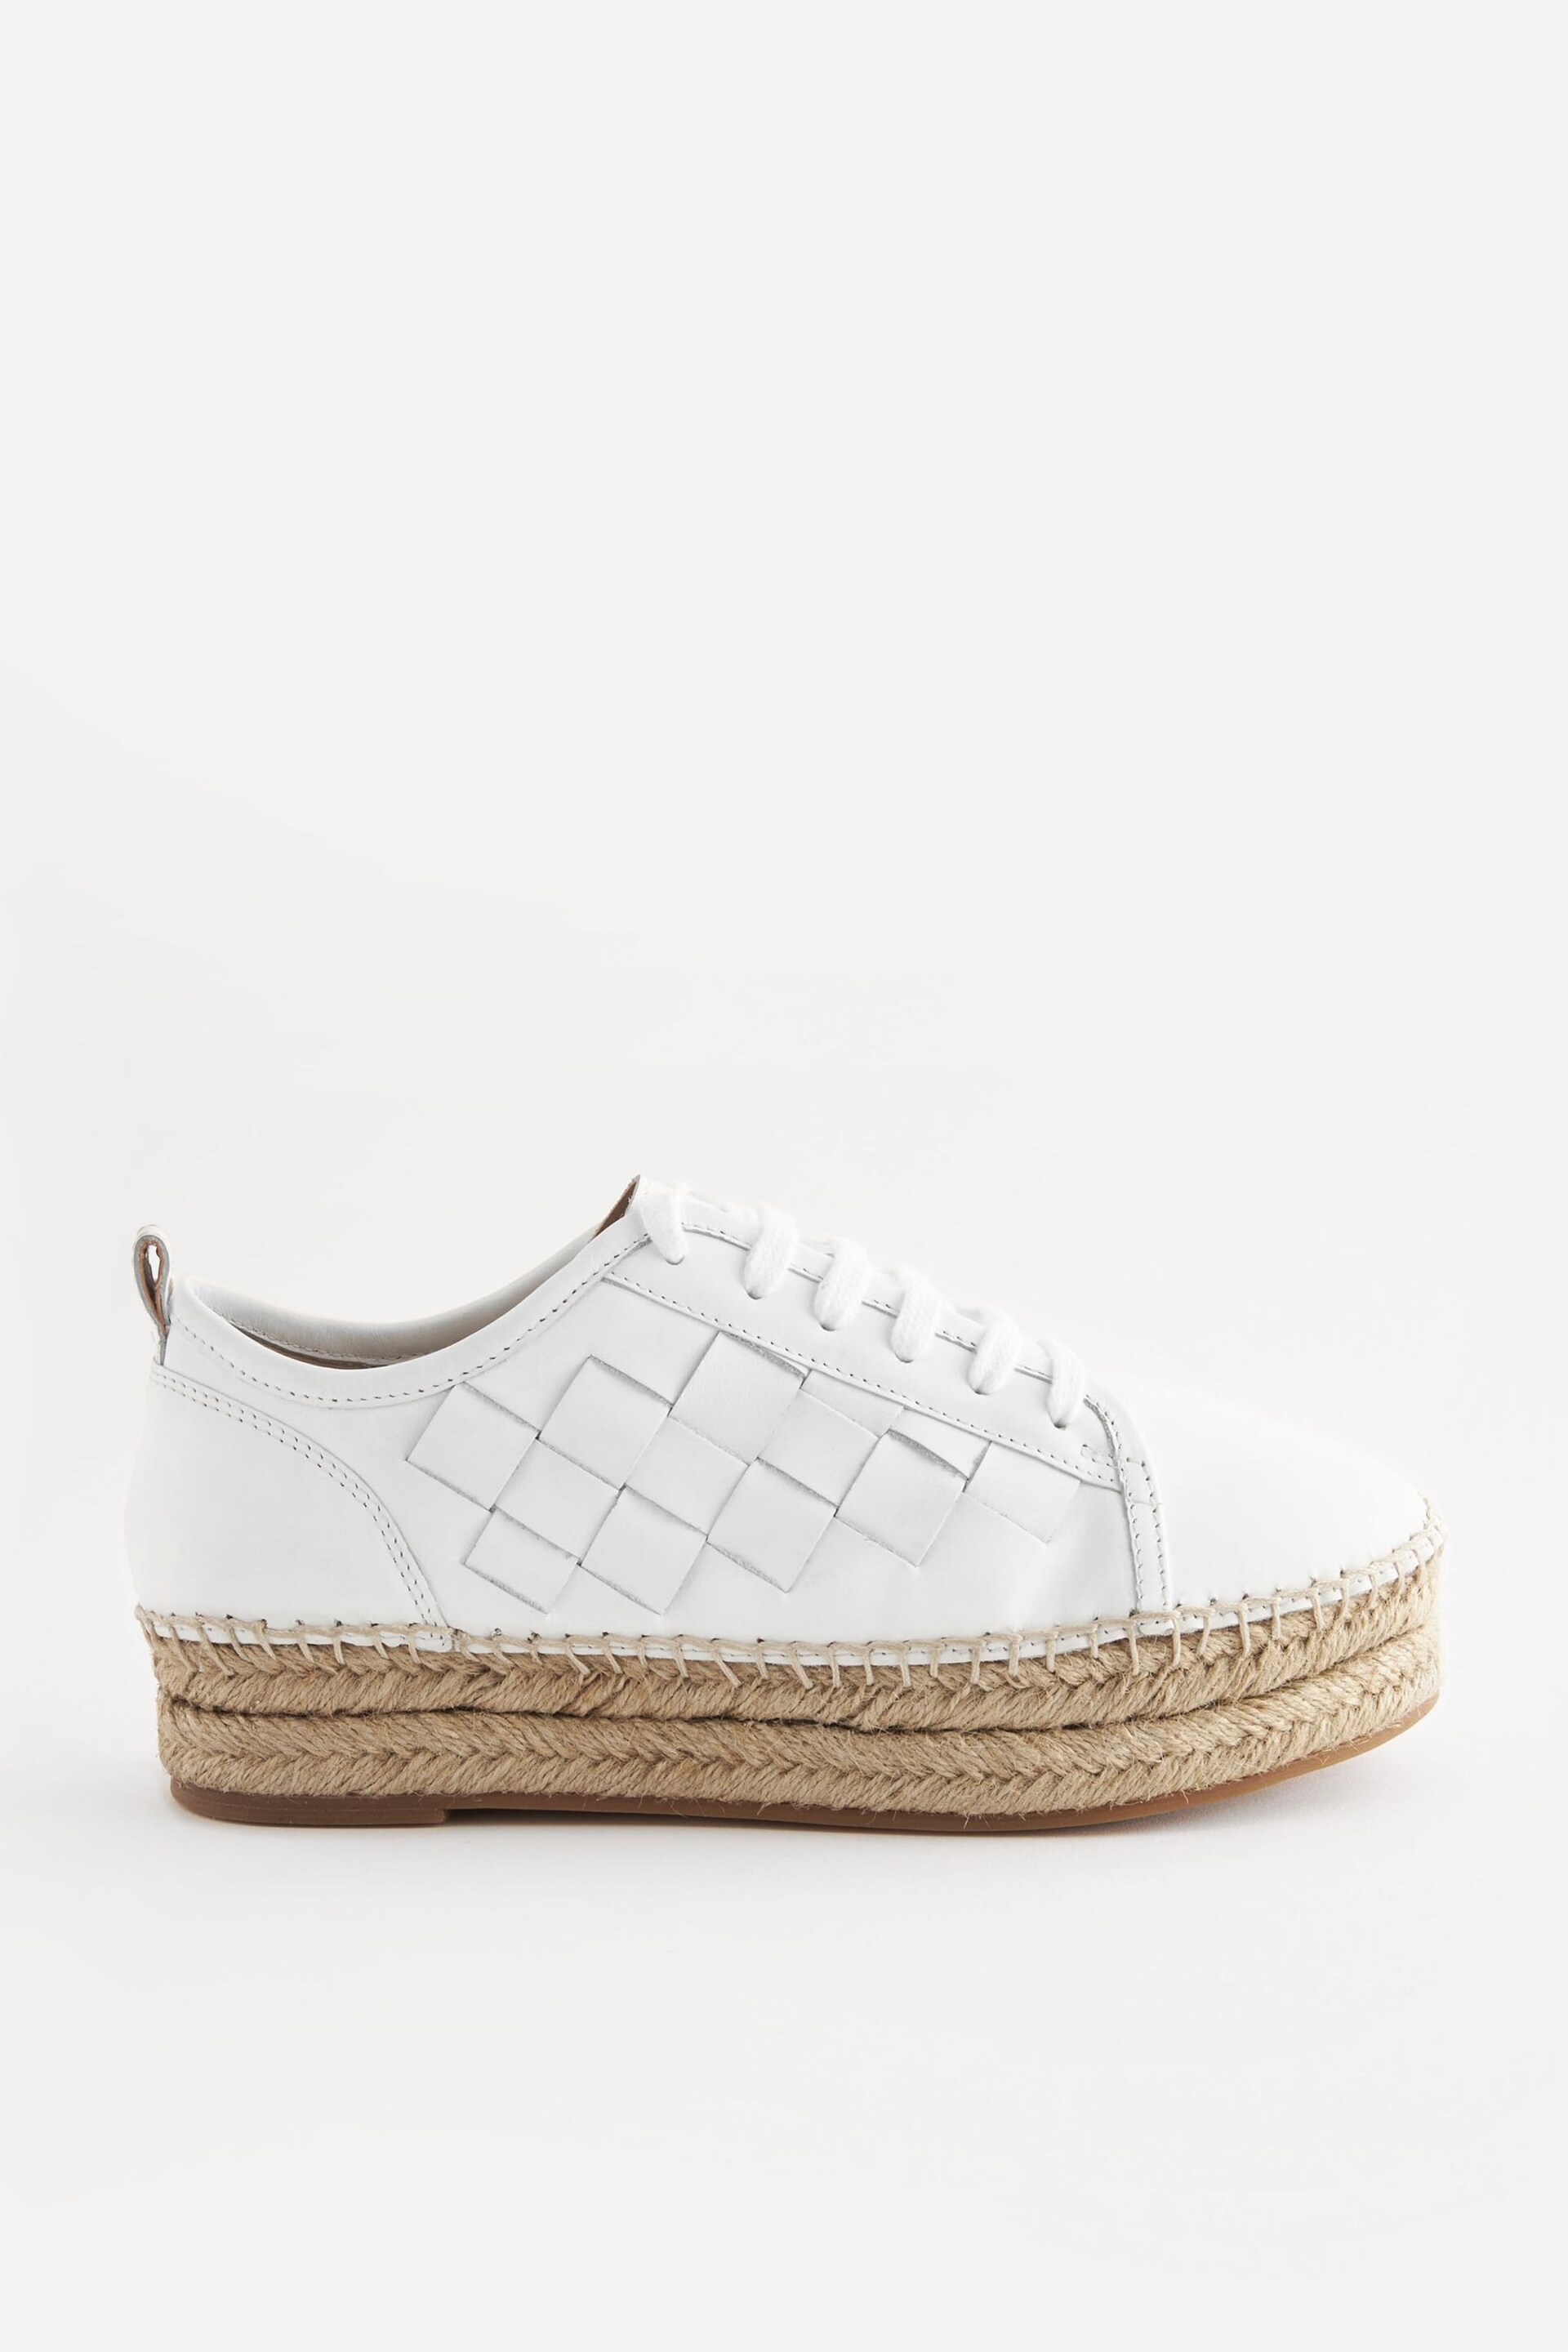 White Forever Comfort® Espadrilles Flatform Weave Trainers - Image 7 of 10